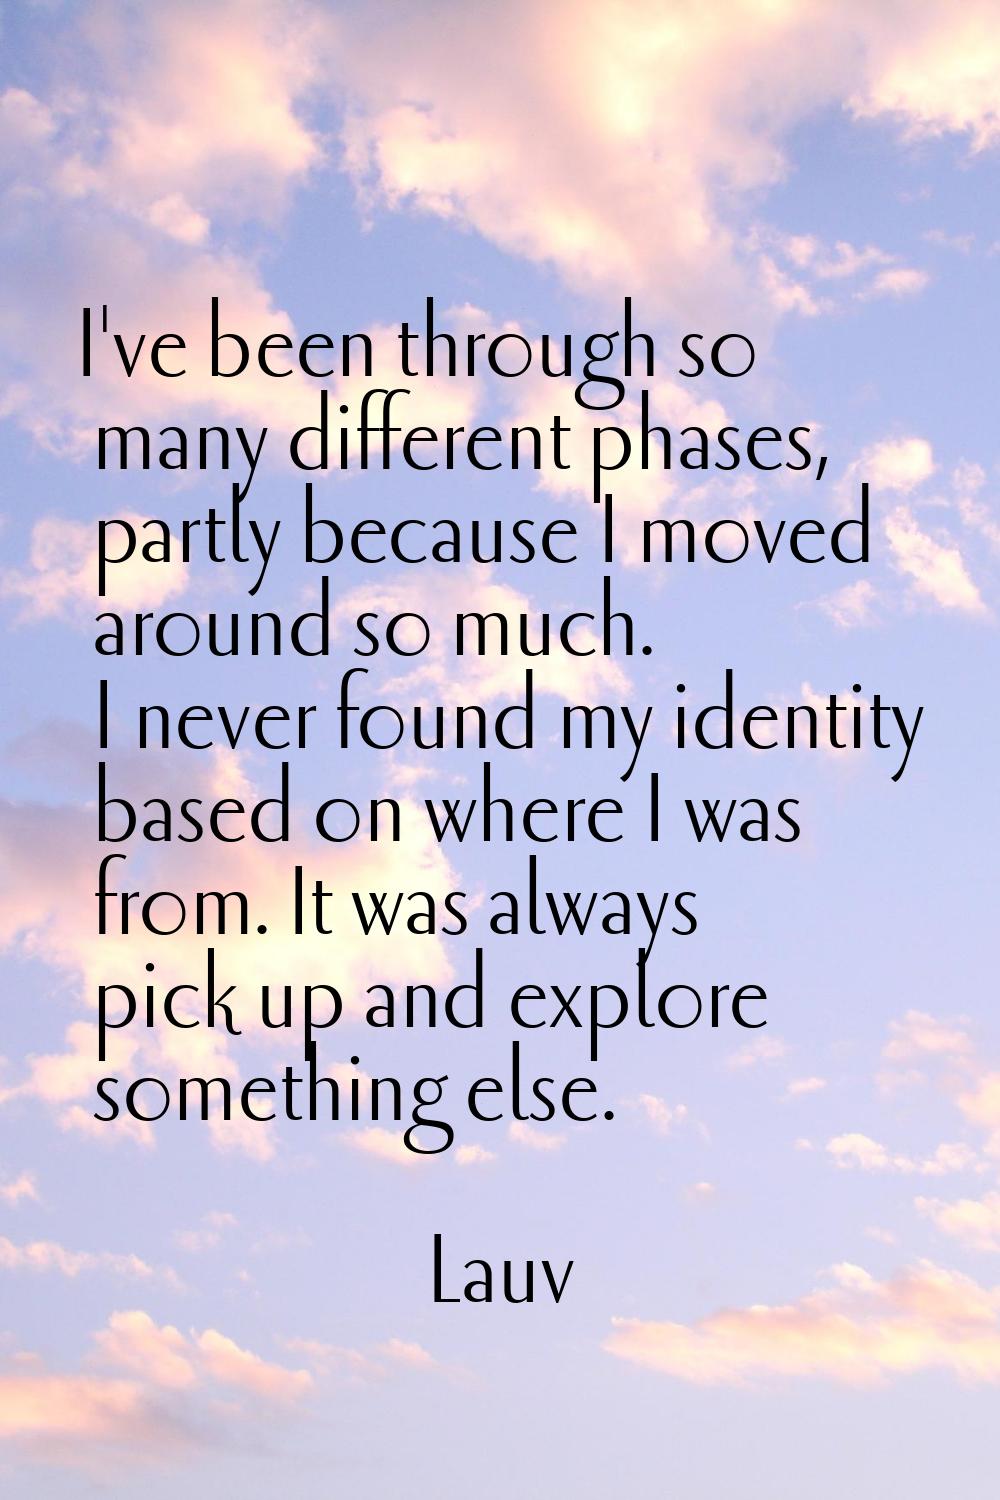 I've been through so many different phases, partly because I moved around so much. I never found my